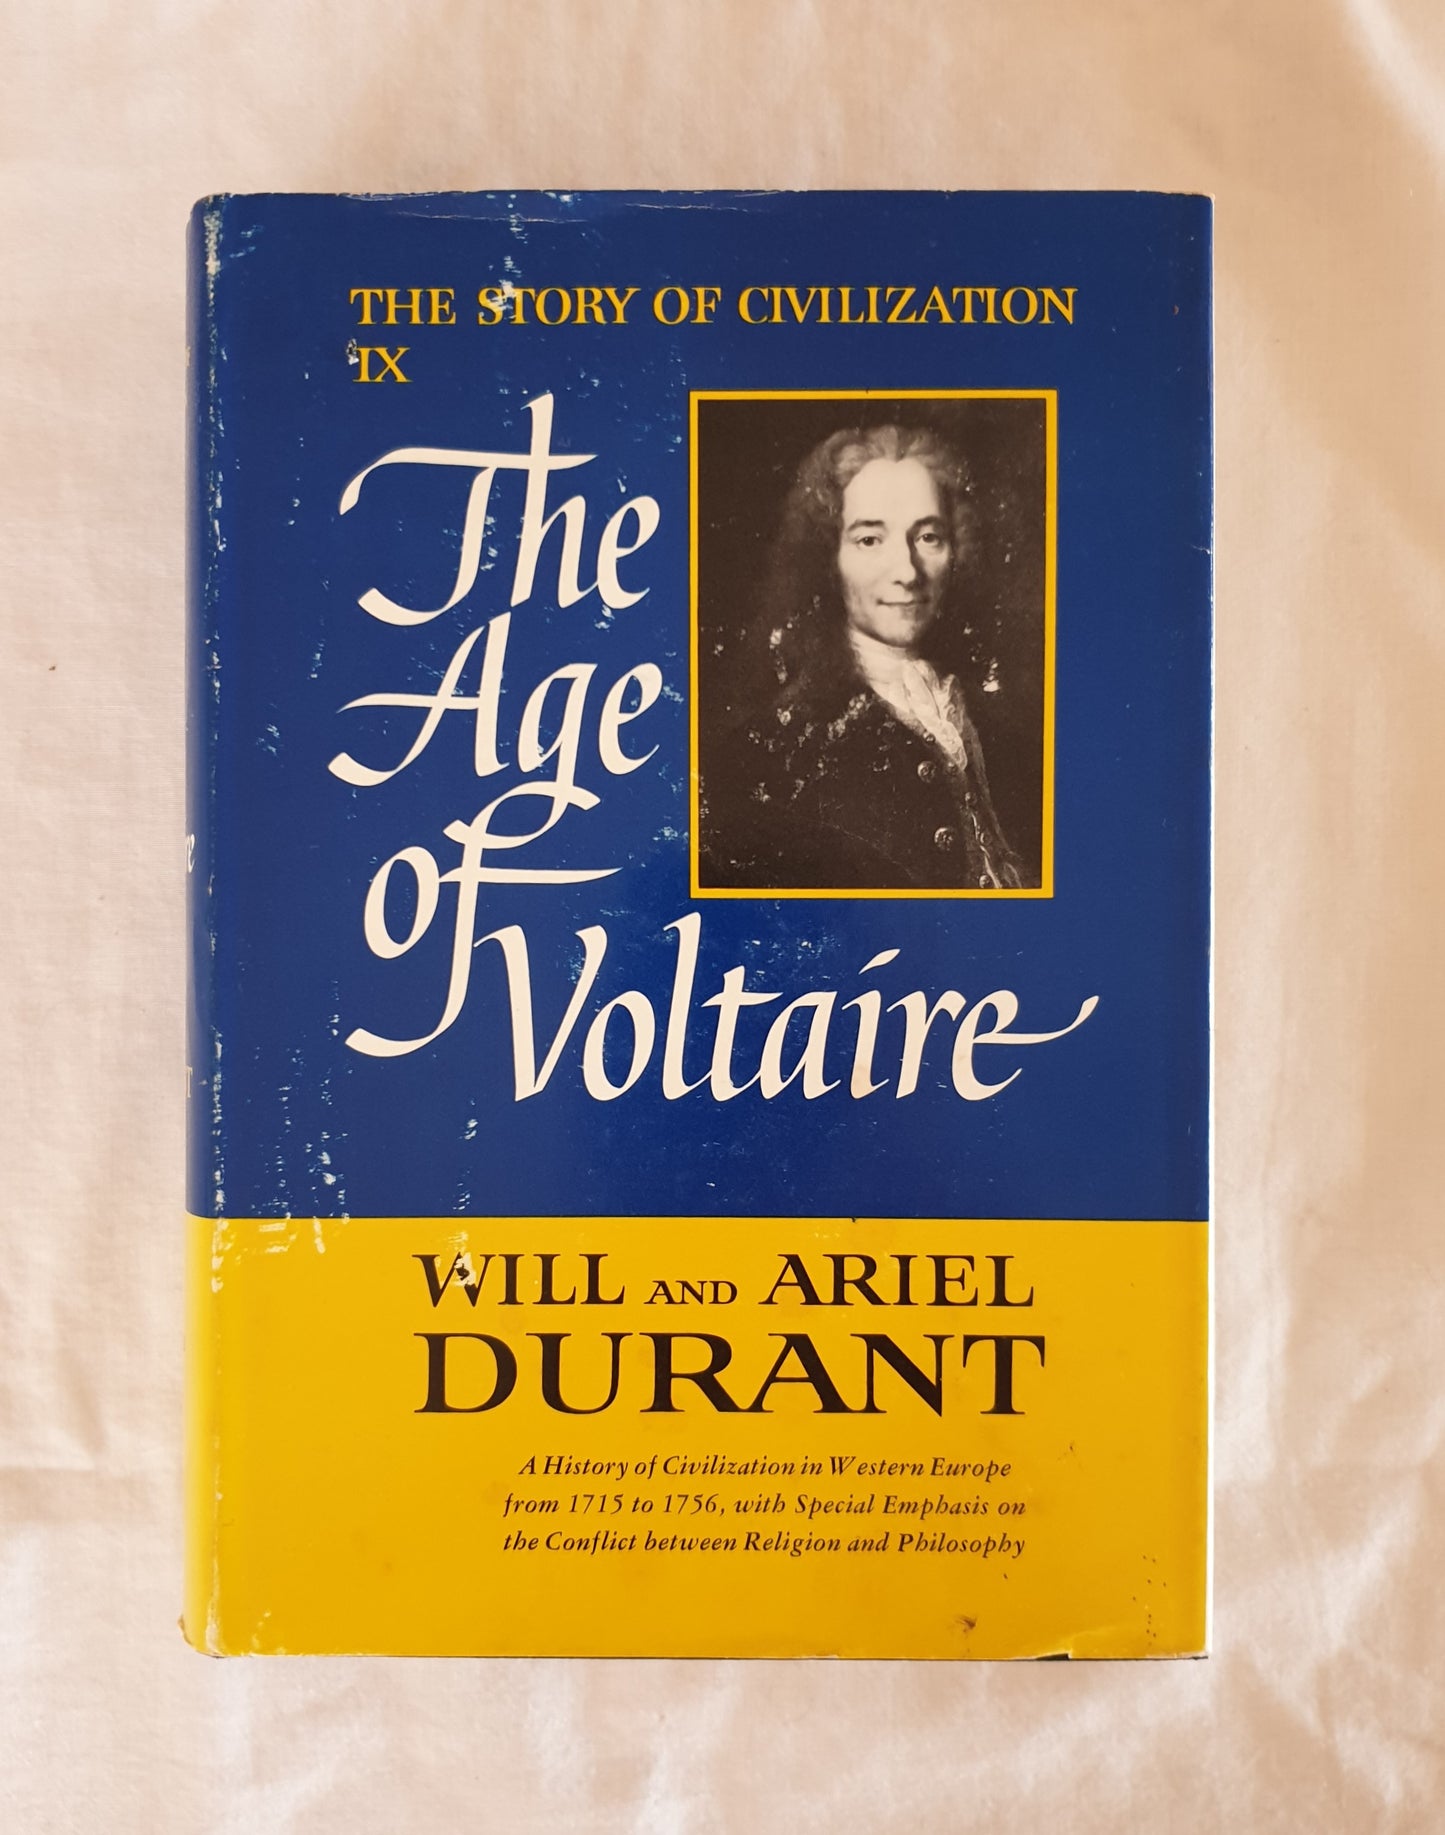 The Age of Voltaire by Will and Ariel Durant